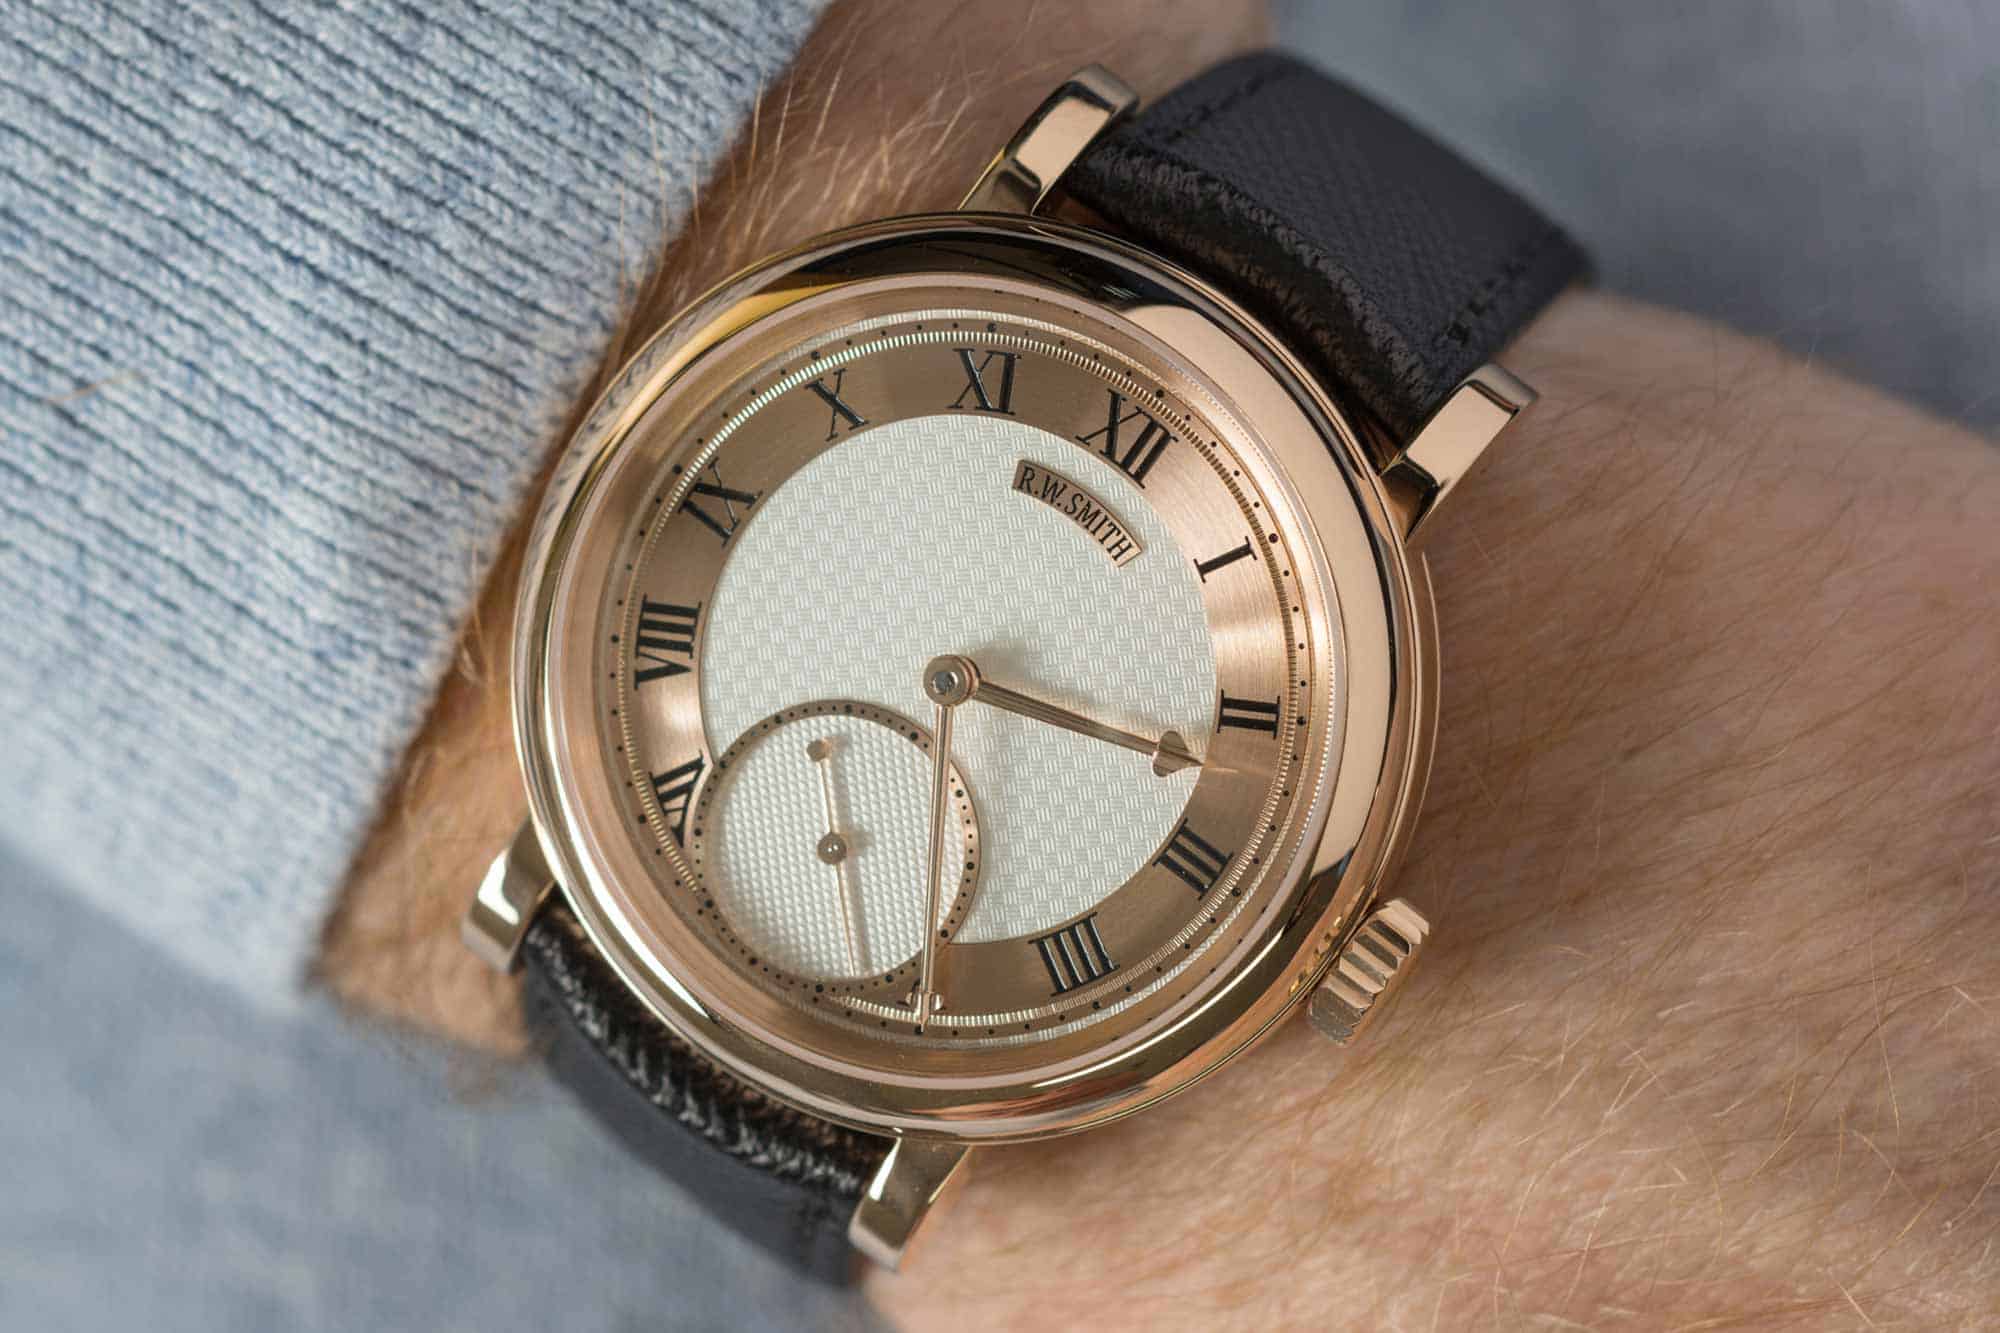 Roger W. Smith and His Unique Series 1 Made for British Watchmakers’ Day